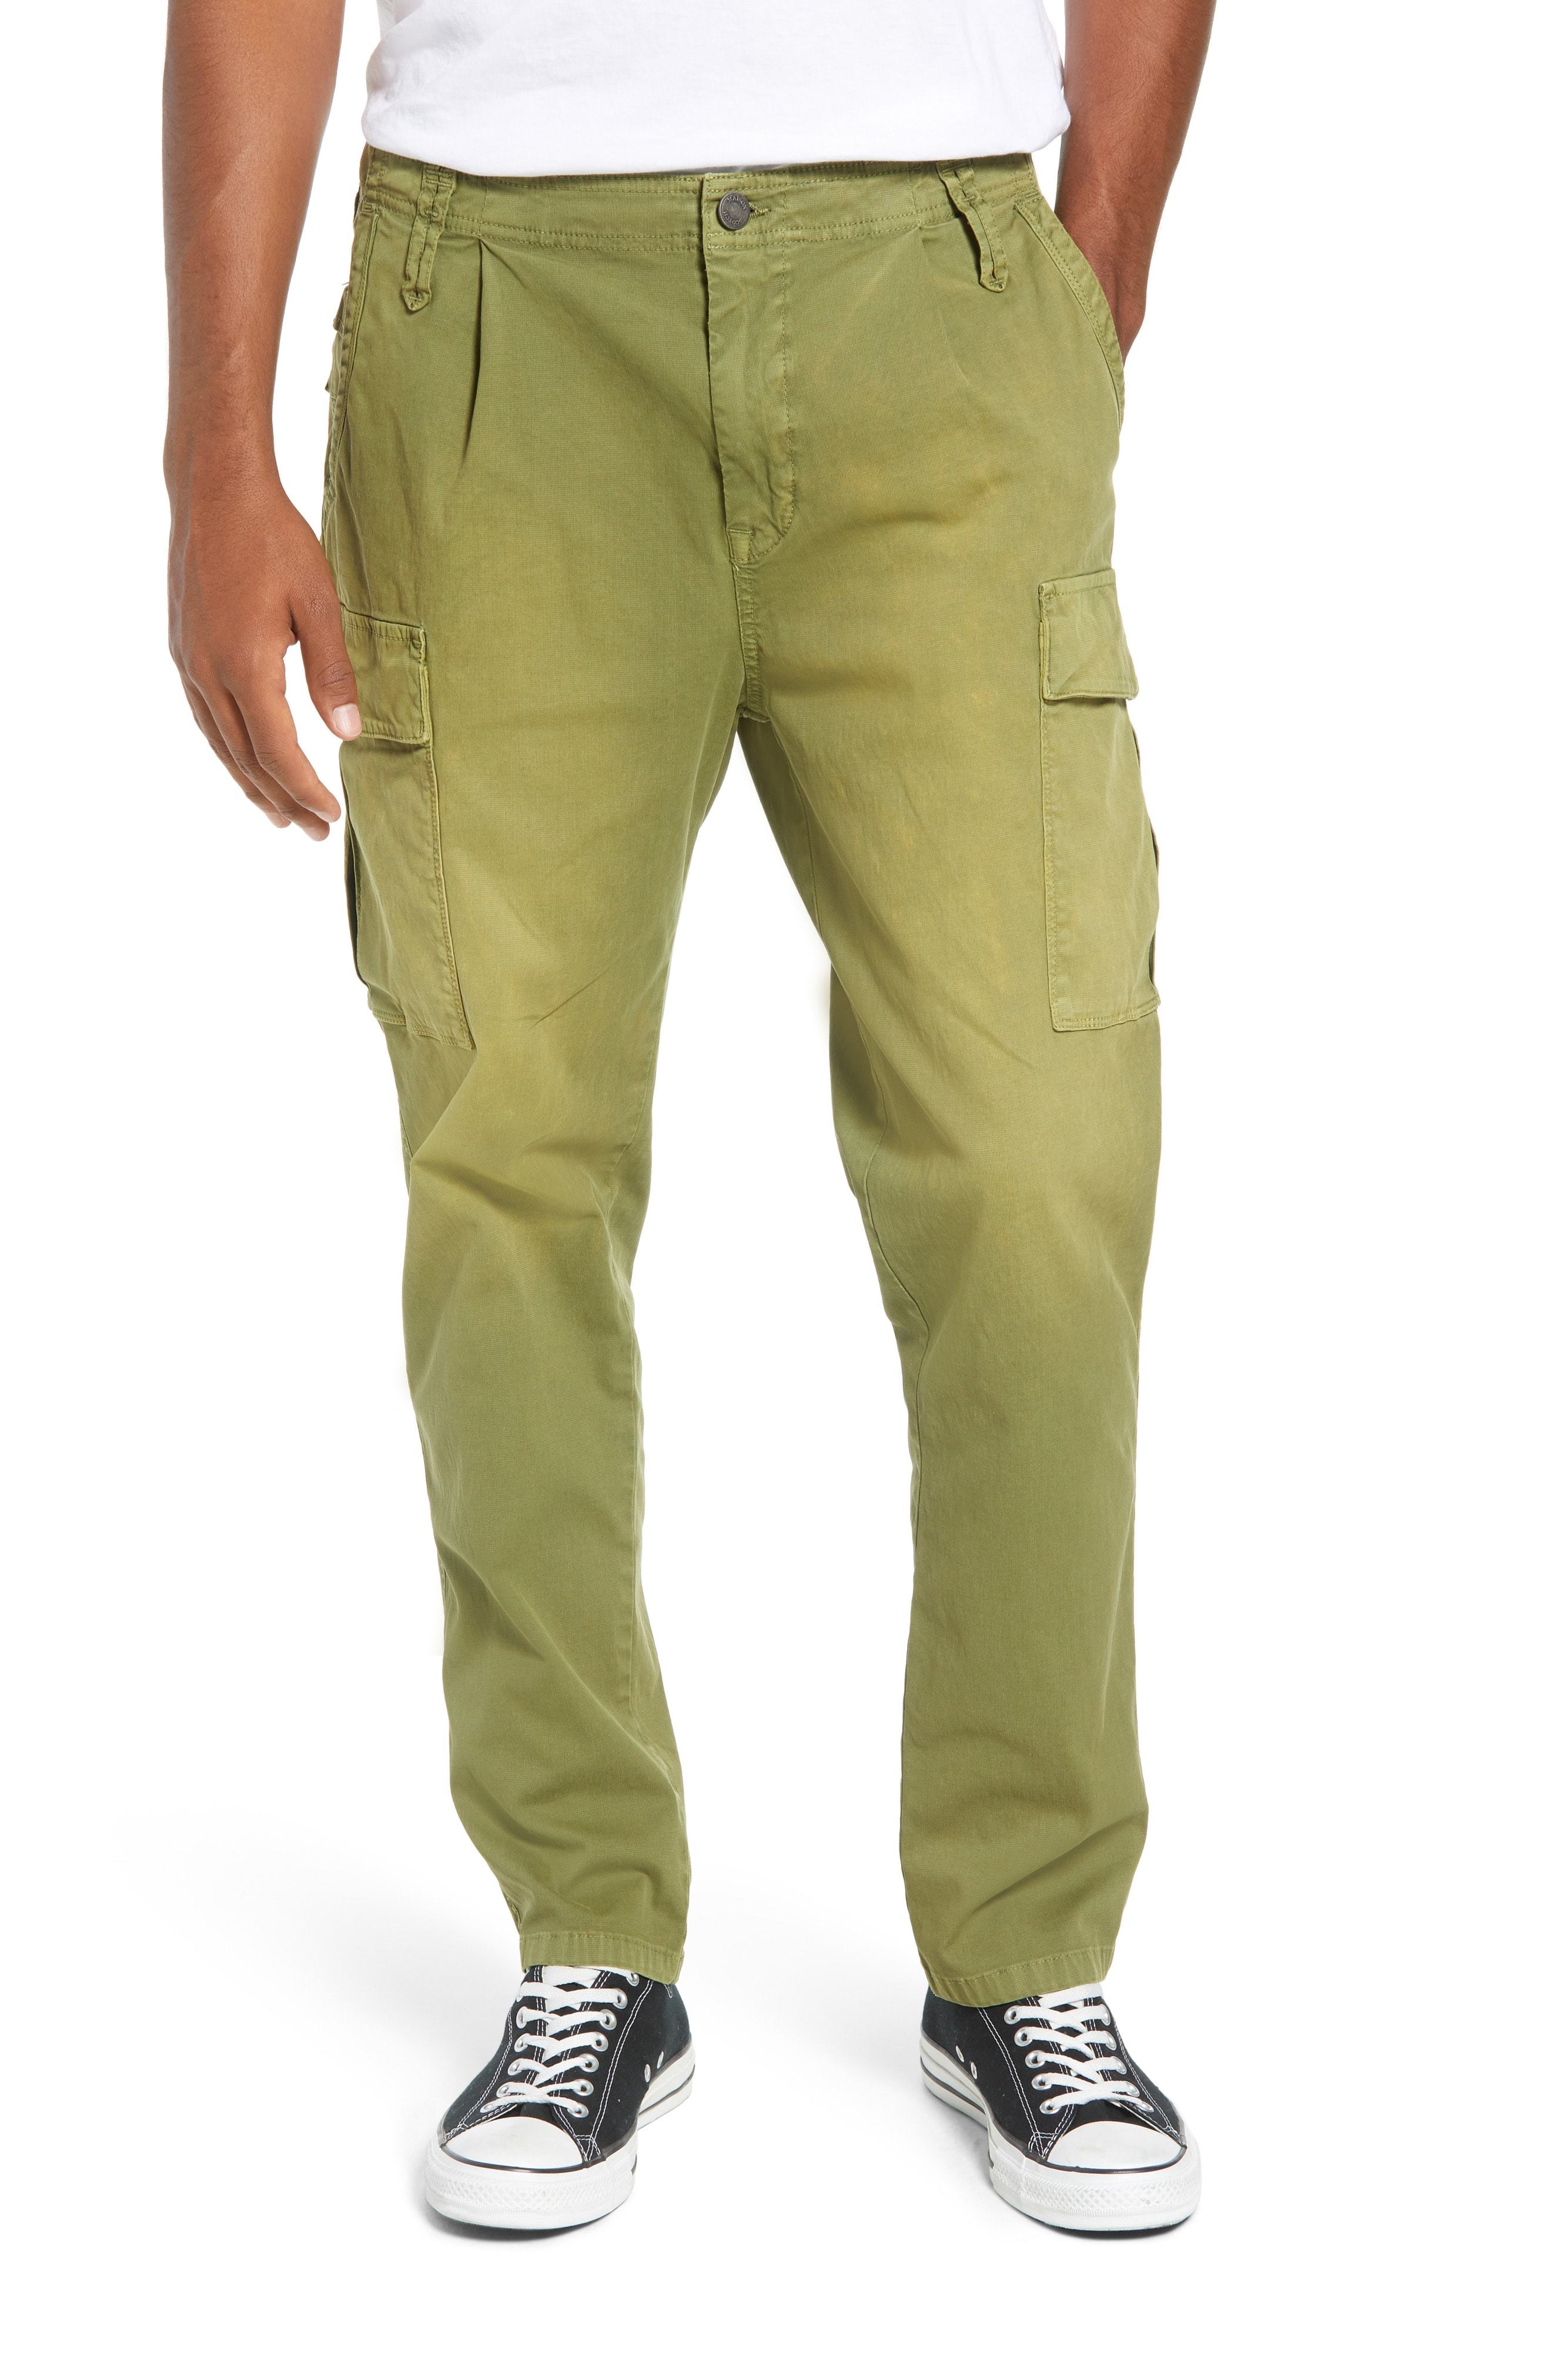 Scotch & Soda Loose Taper Fit Washed Cargo Pants, $75 | Nordstrom ...